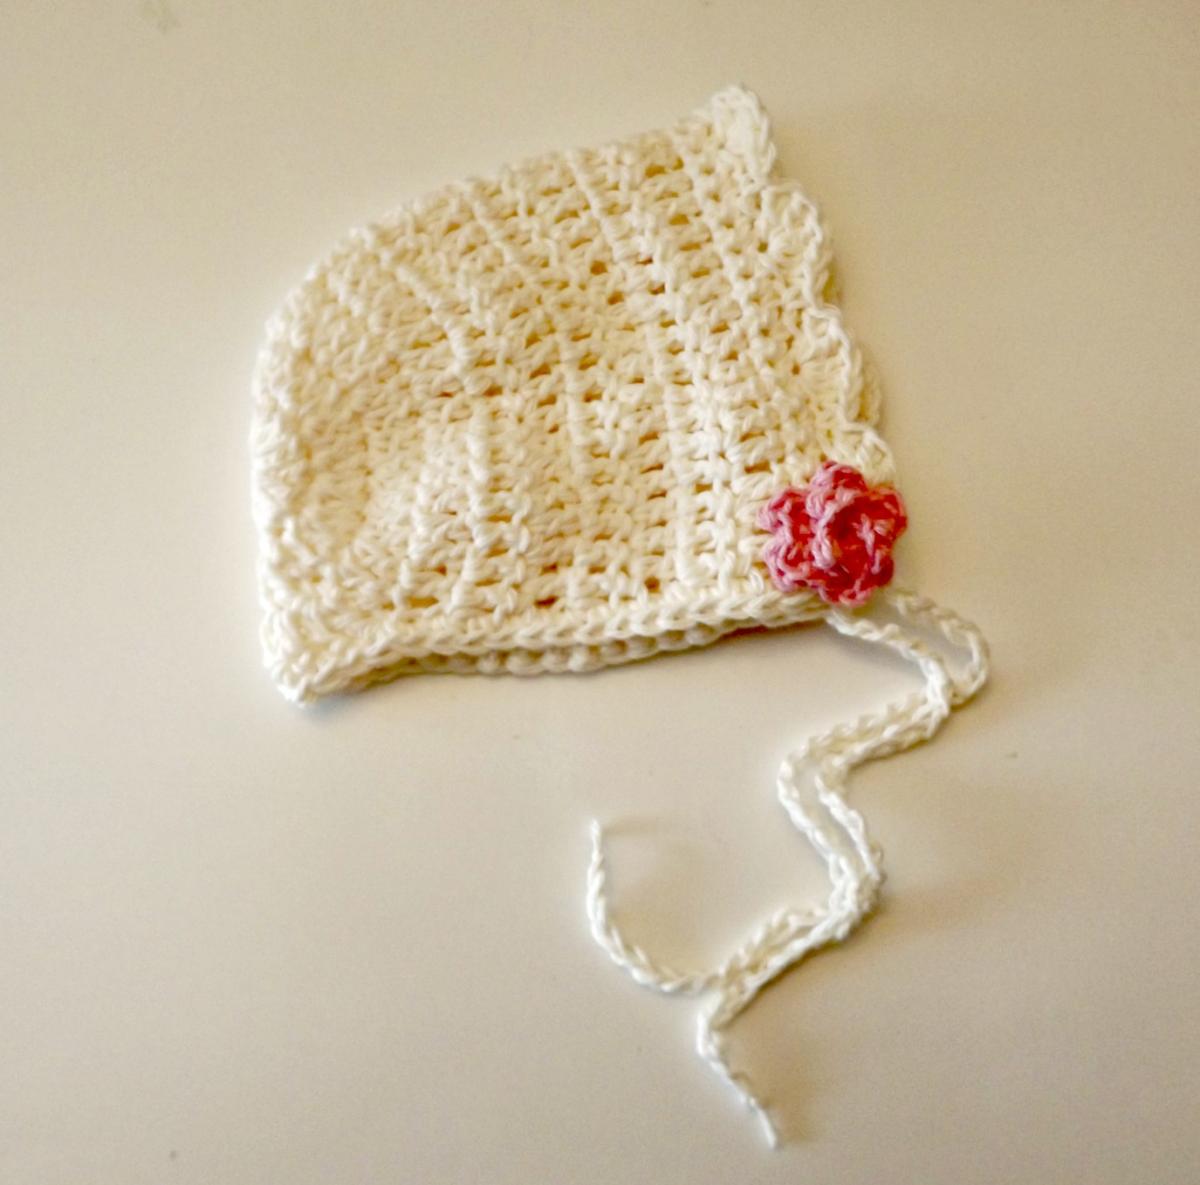 Crochet Baby Bonnet In Antique Ivory With Roses And Scallops Size 0-3 Months Ready To Ship